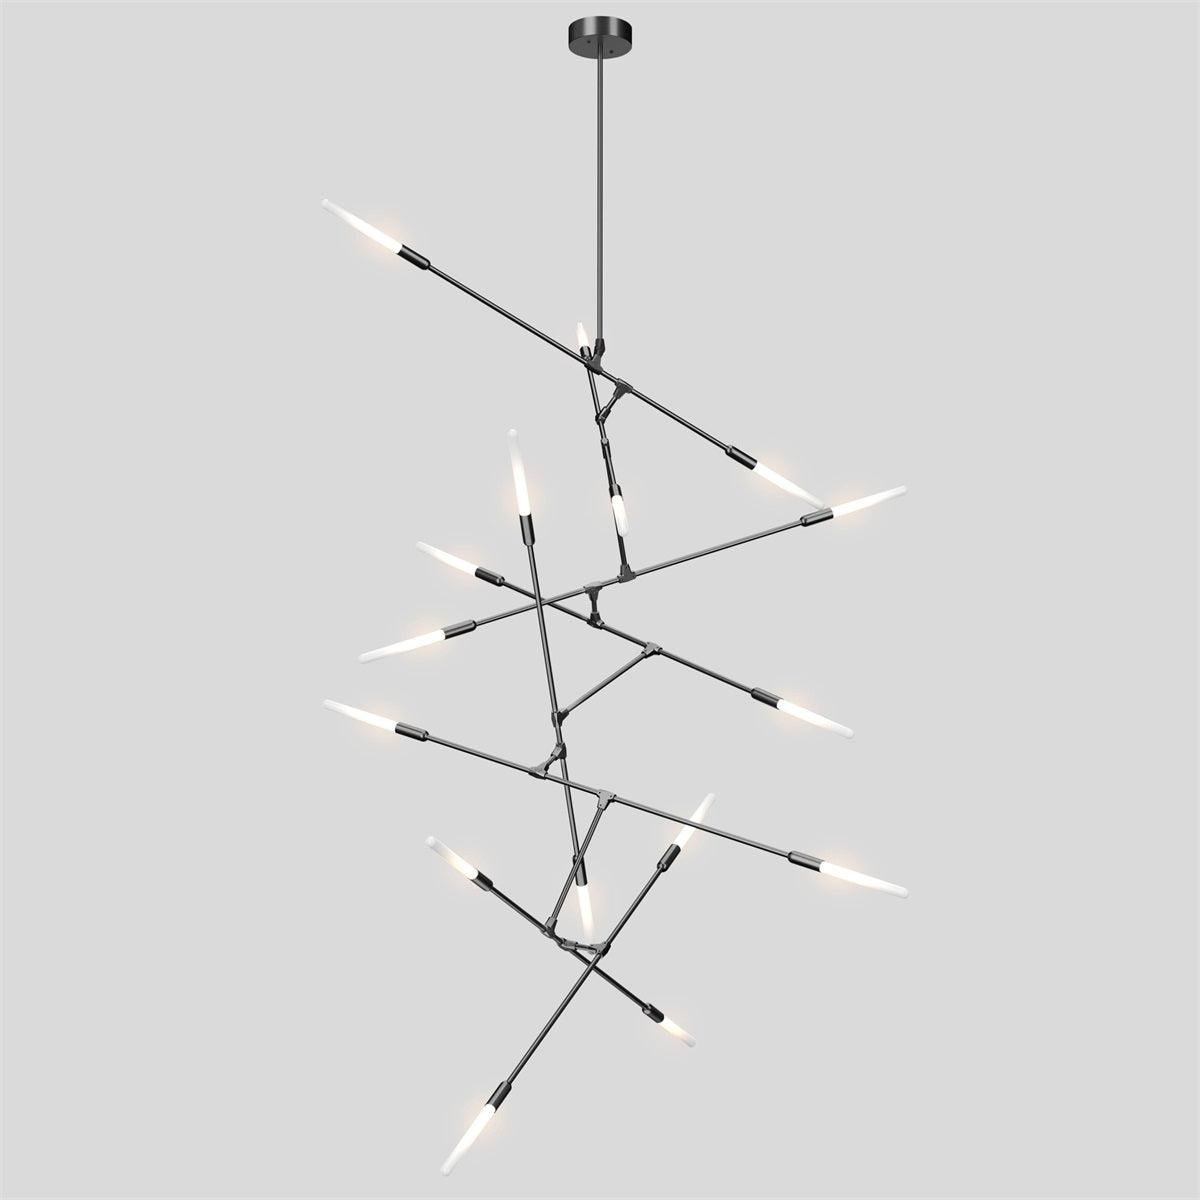 Black Dawn Chandeliers Vertical with 16heads, measuring ∅ 59.1″ x H 98.4″